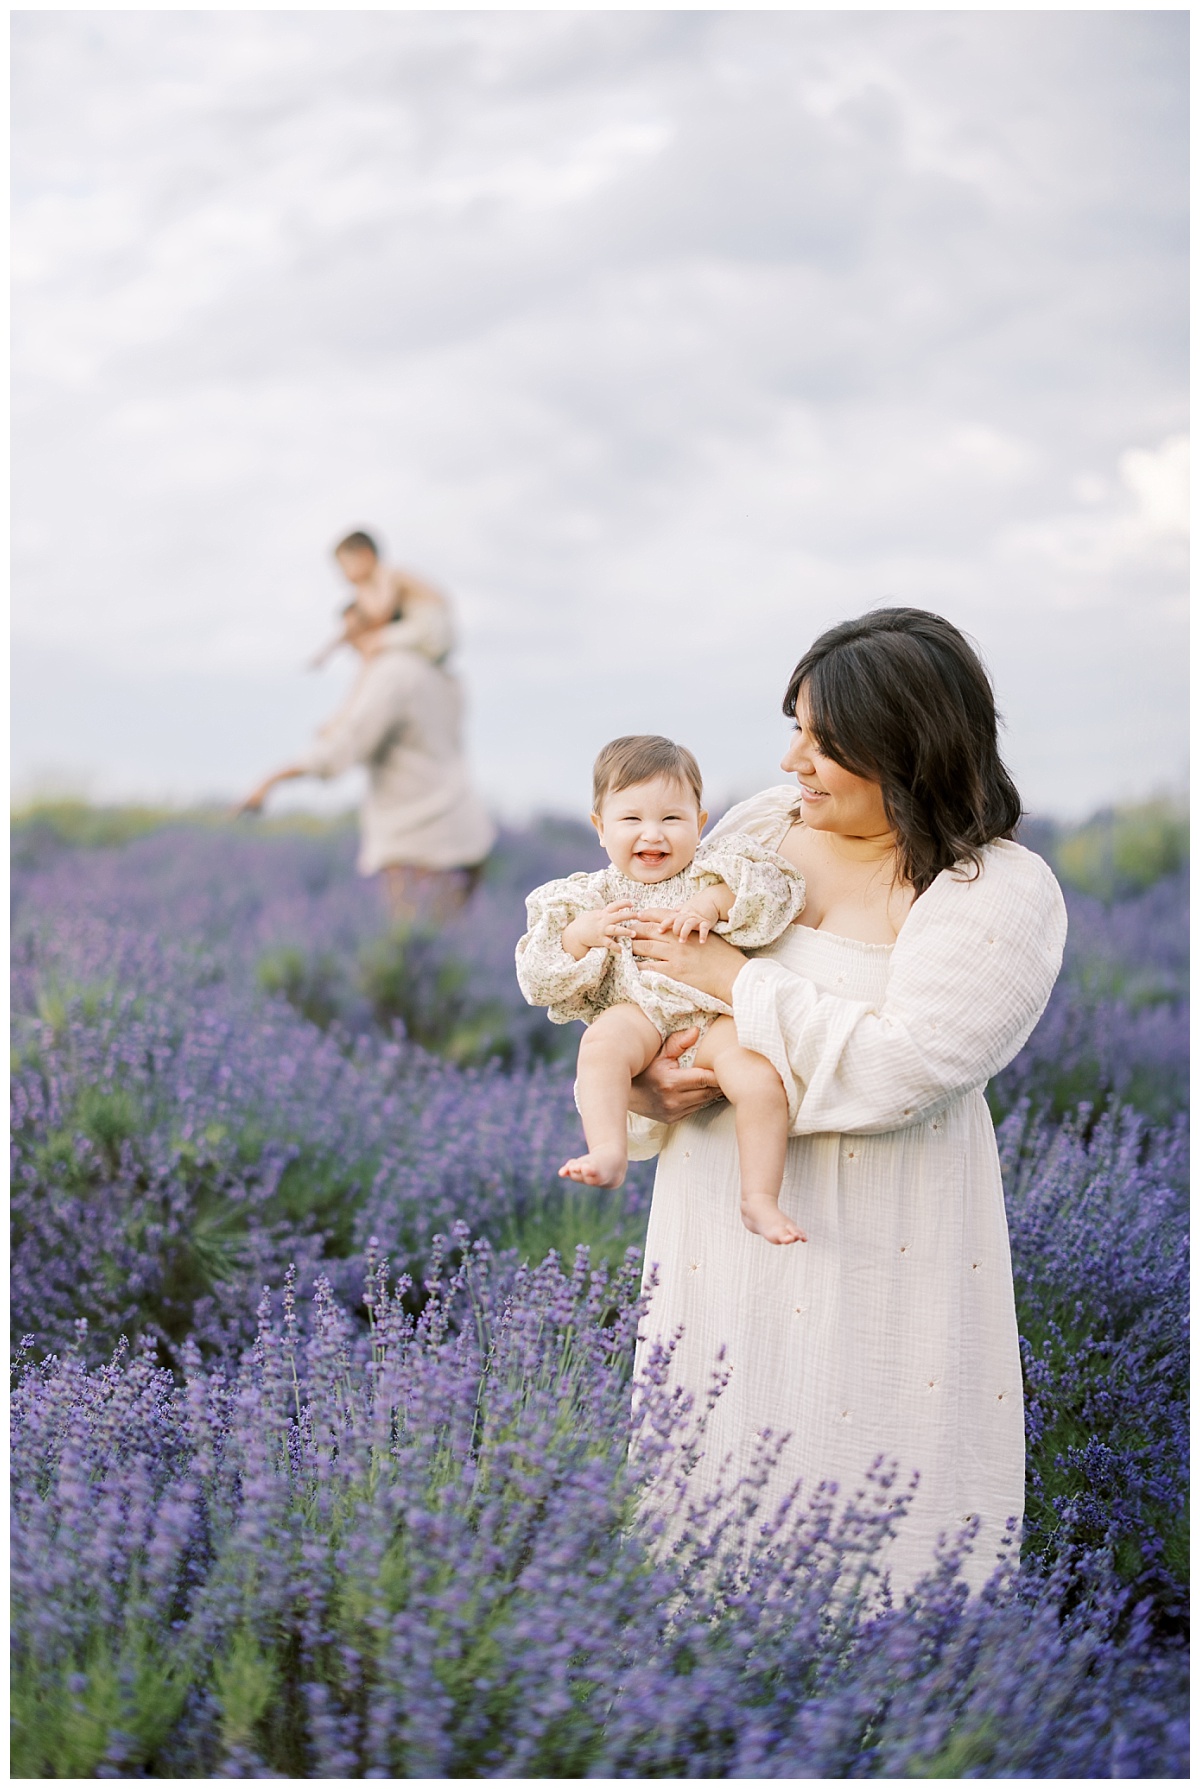 stuttgart family photographer shares images of a family in a lavender field